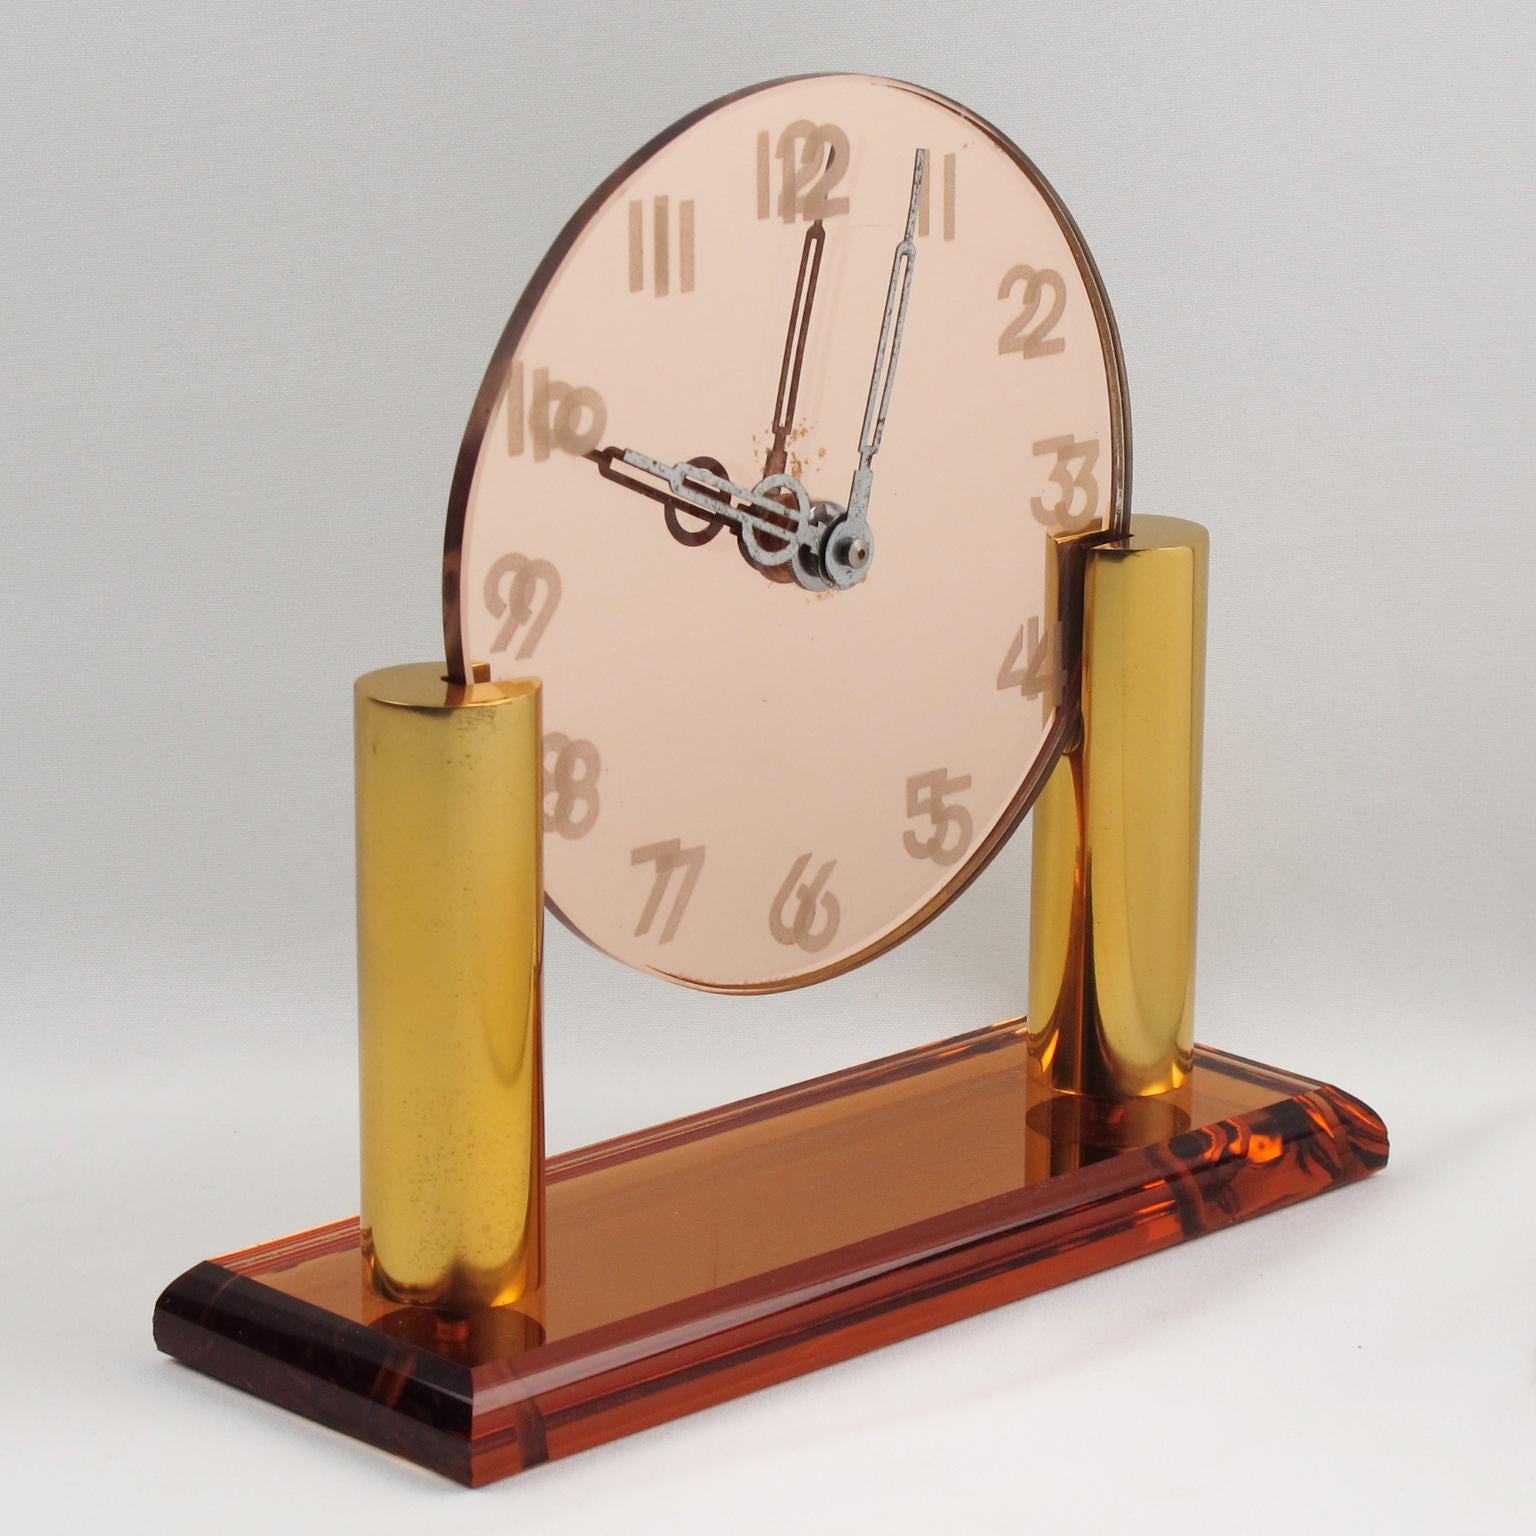 Lovely French Art Deco desk, vanity, table clock. Original Art Deco mirrored copper and peach glass clock with heavy gilded brass holders. Base of clock is made of a thick mirrored glass plinth in copper glass color with two round geometric gilded